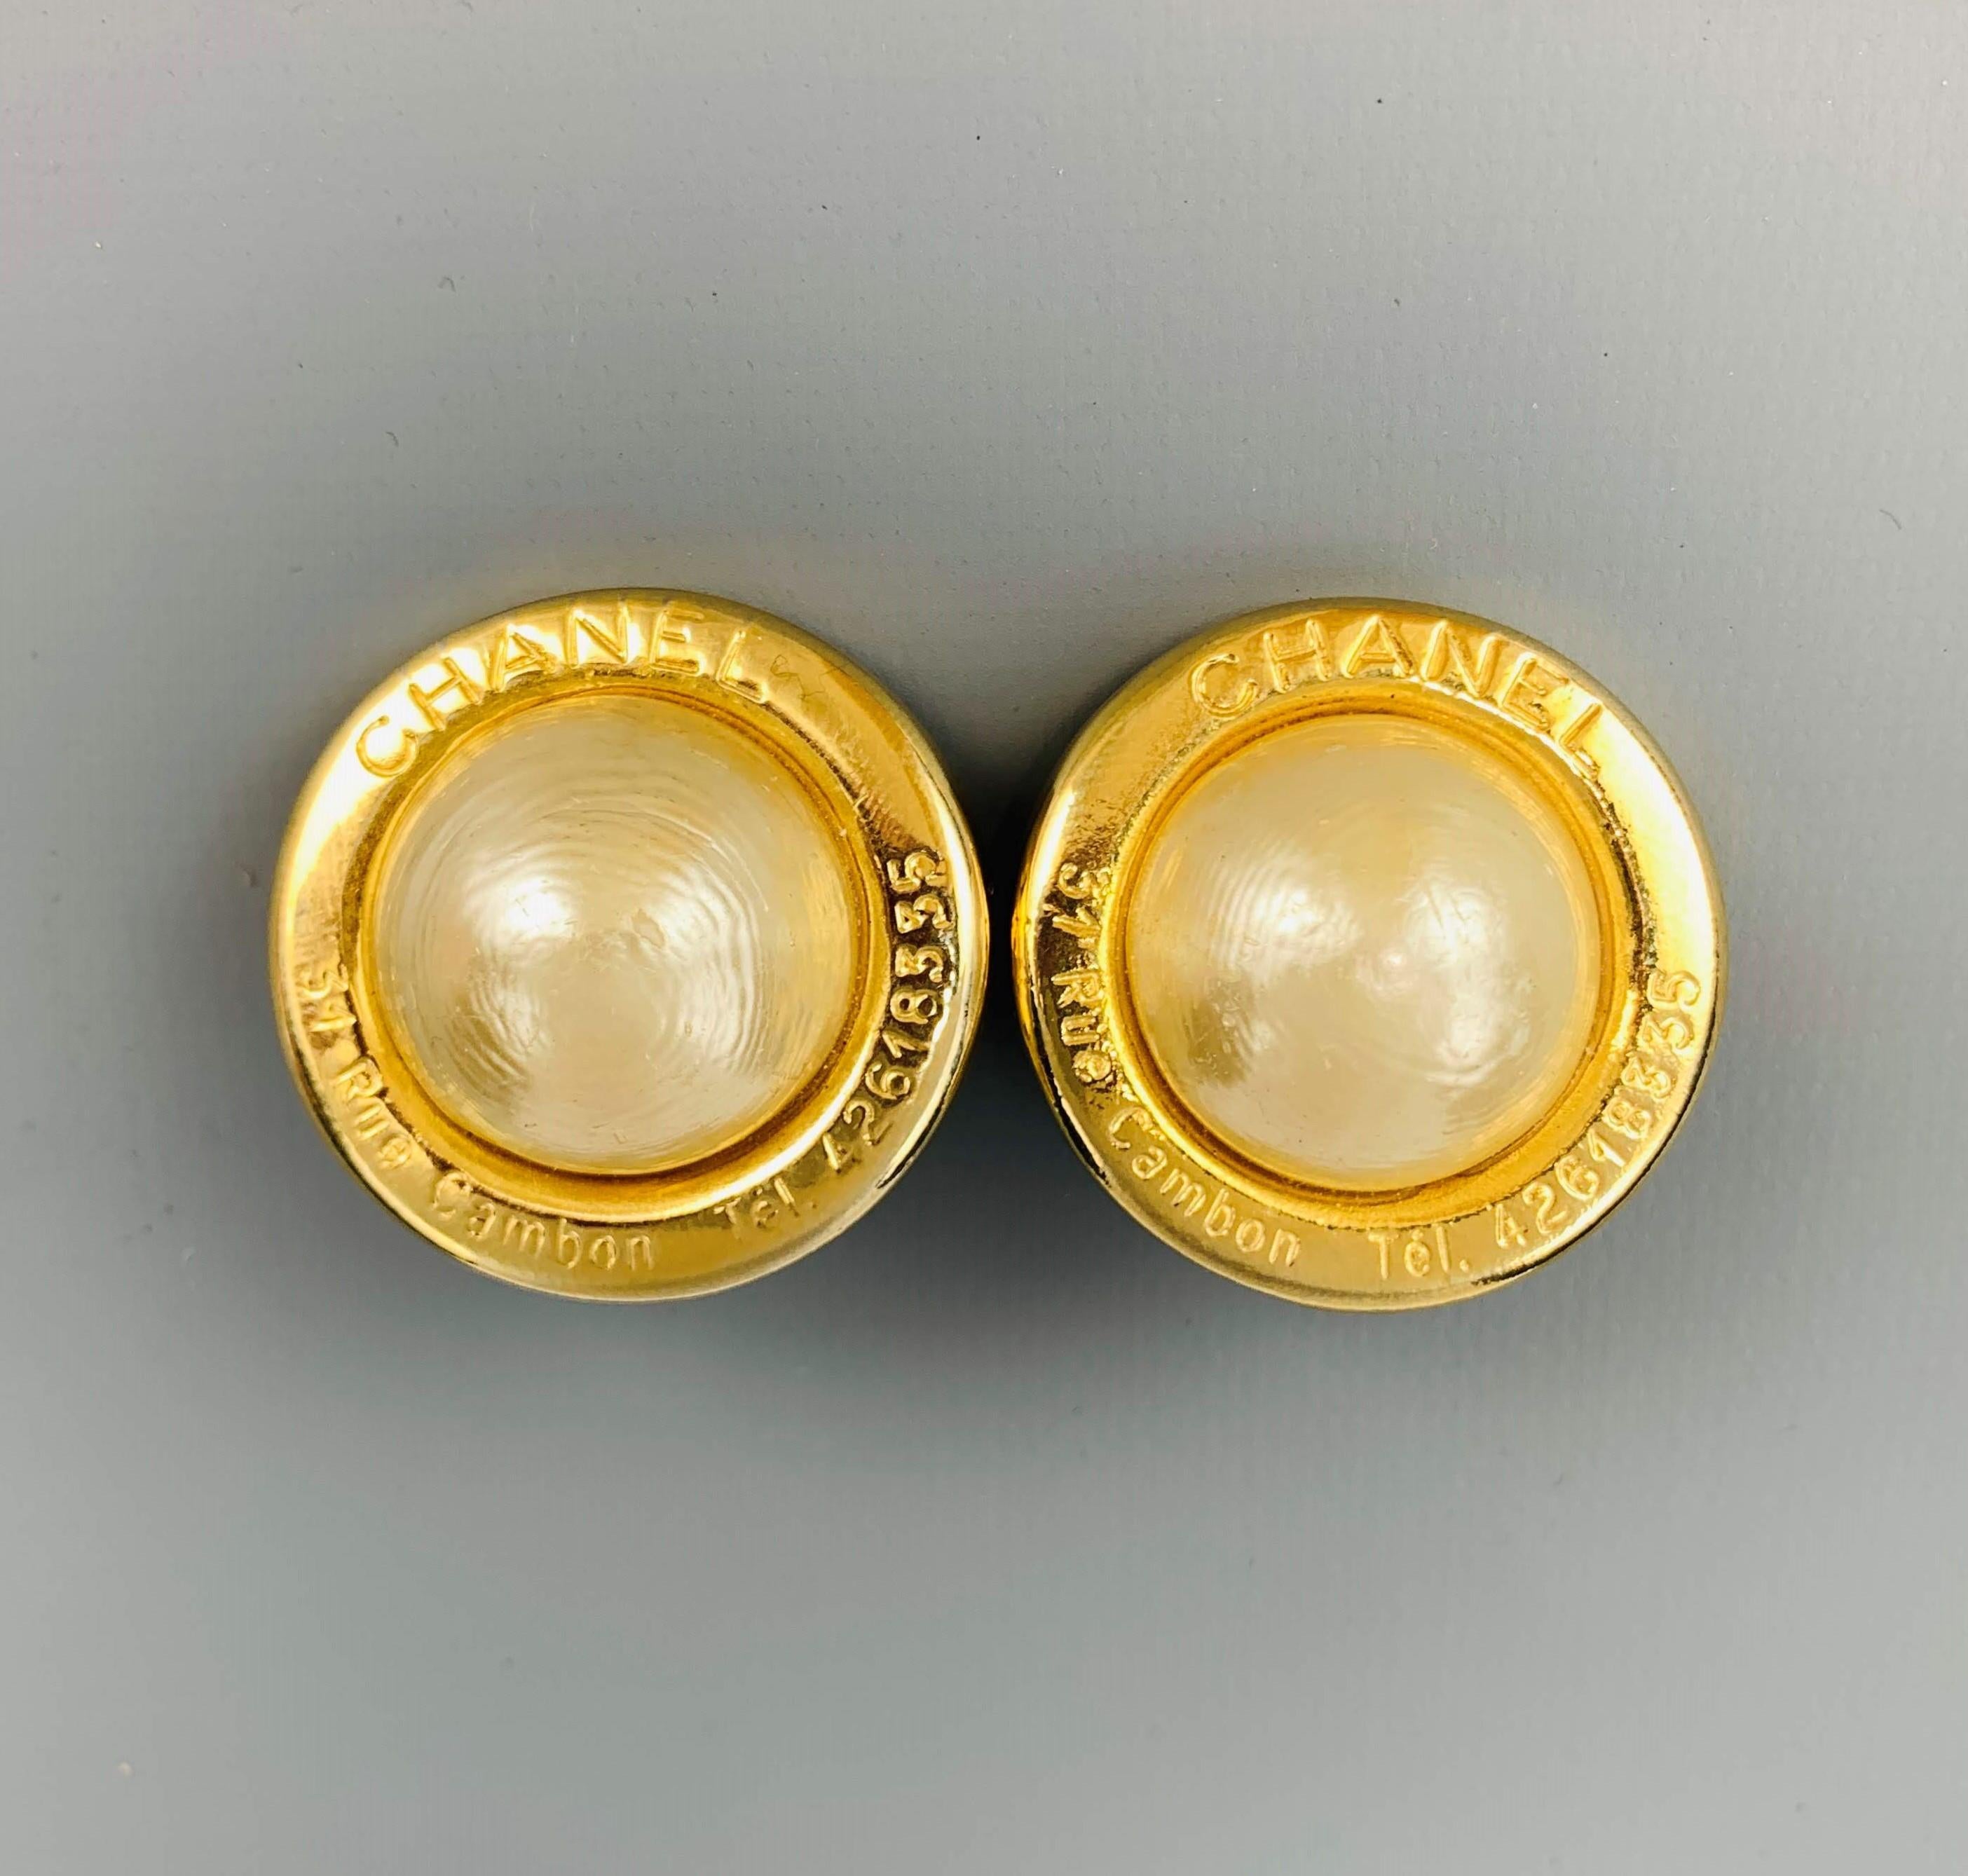 Vintage CHANEL (Circa 1954-1971) round clip on earrings come in yellow gold tone metal with 